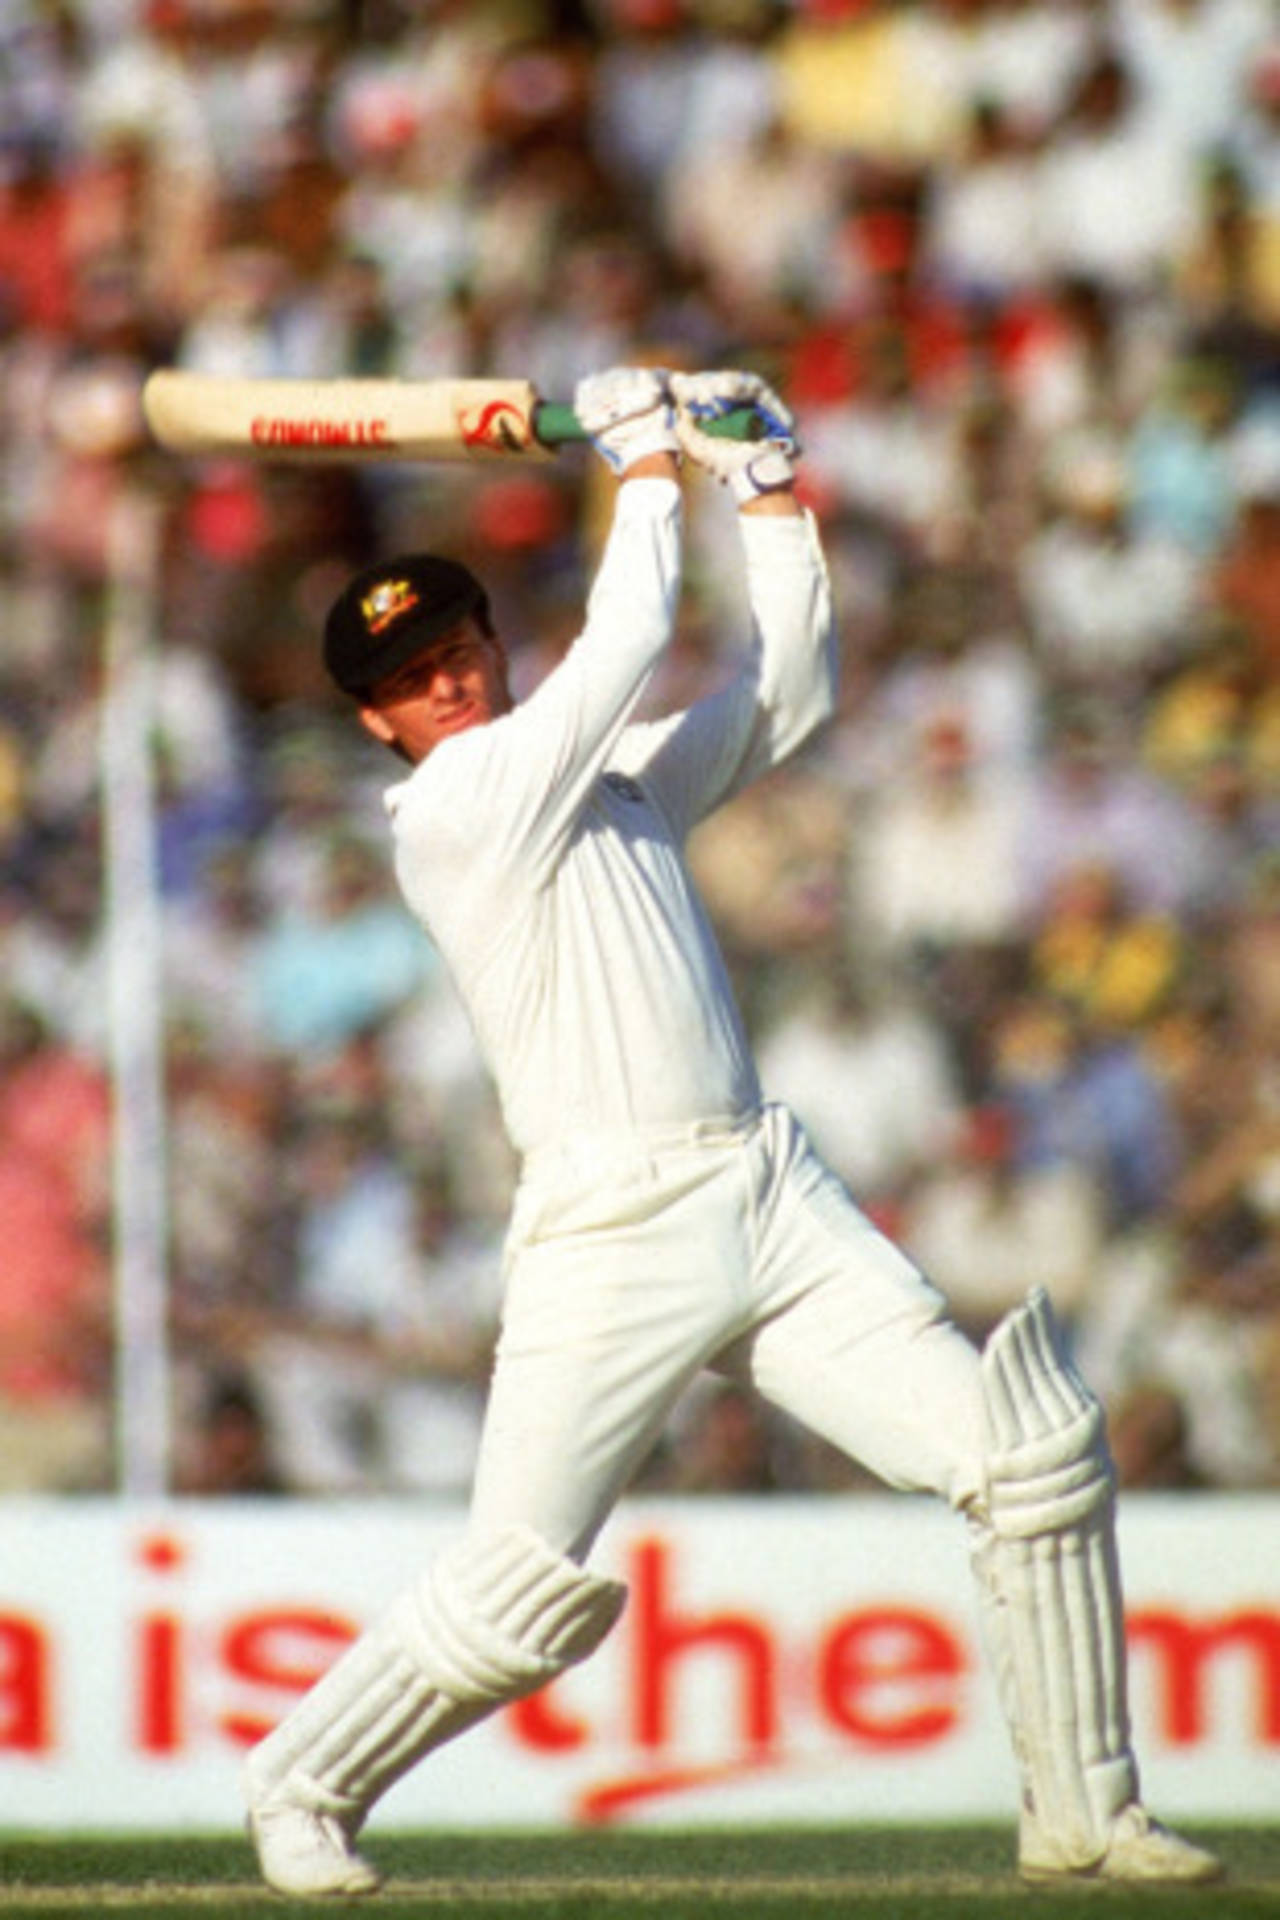 Steve Waugh was the top all-rounder of the tournament averaging 55 with the bat and picking up 11 wickets.